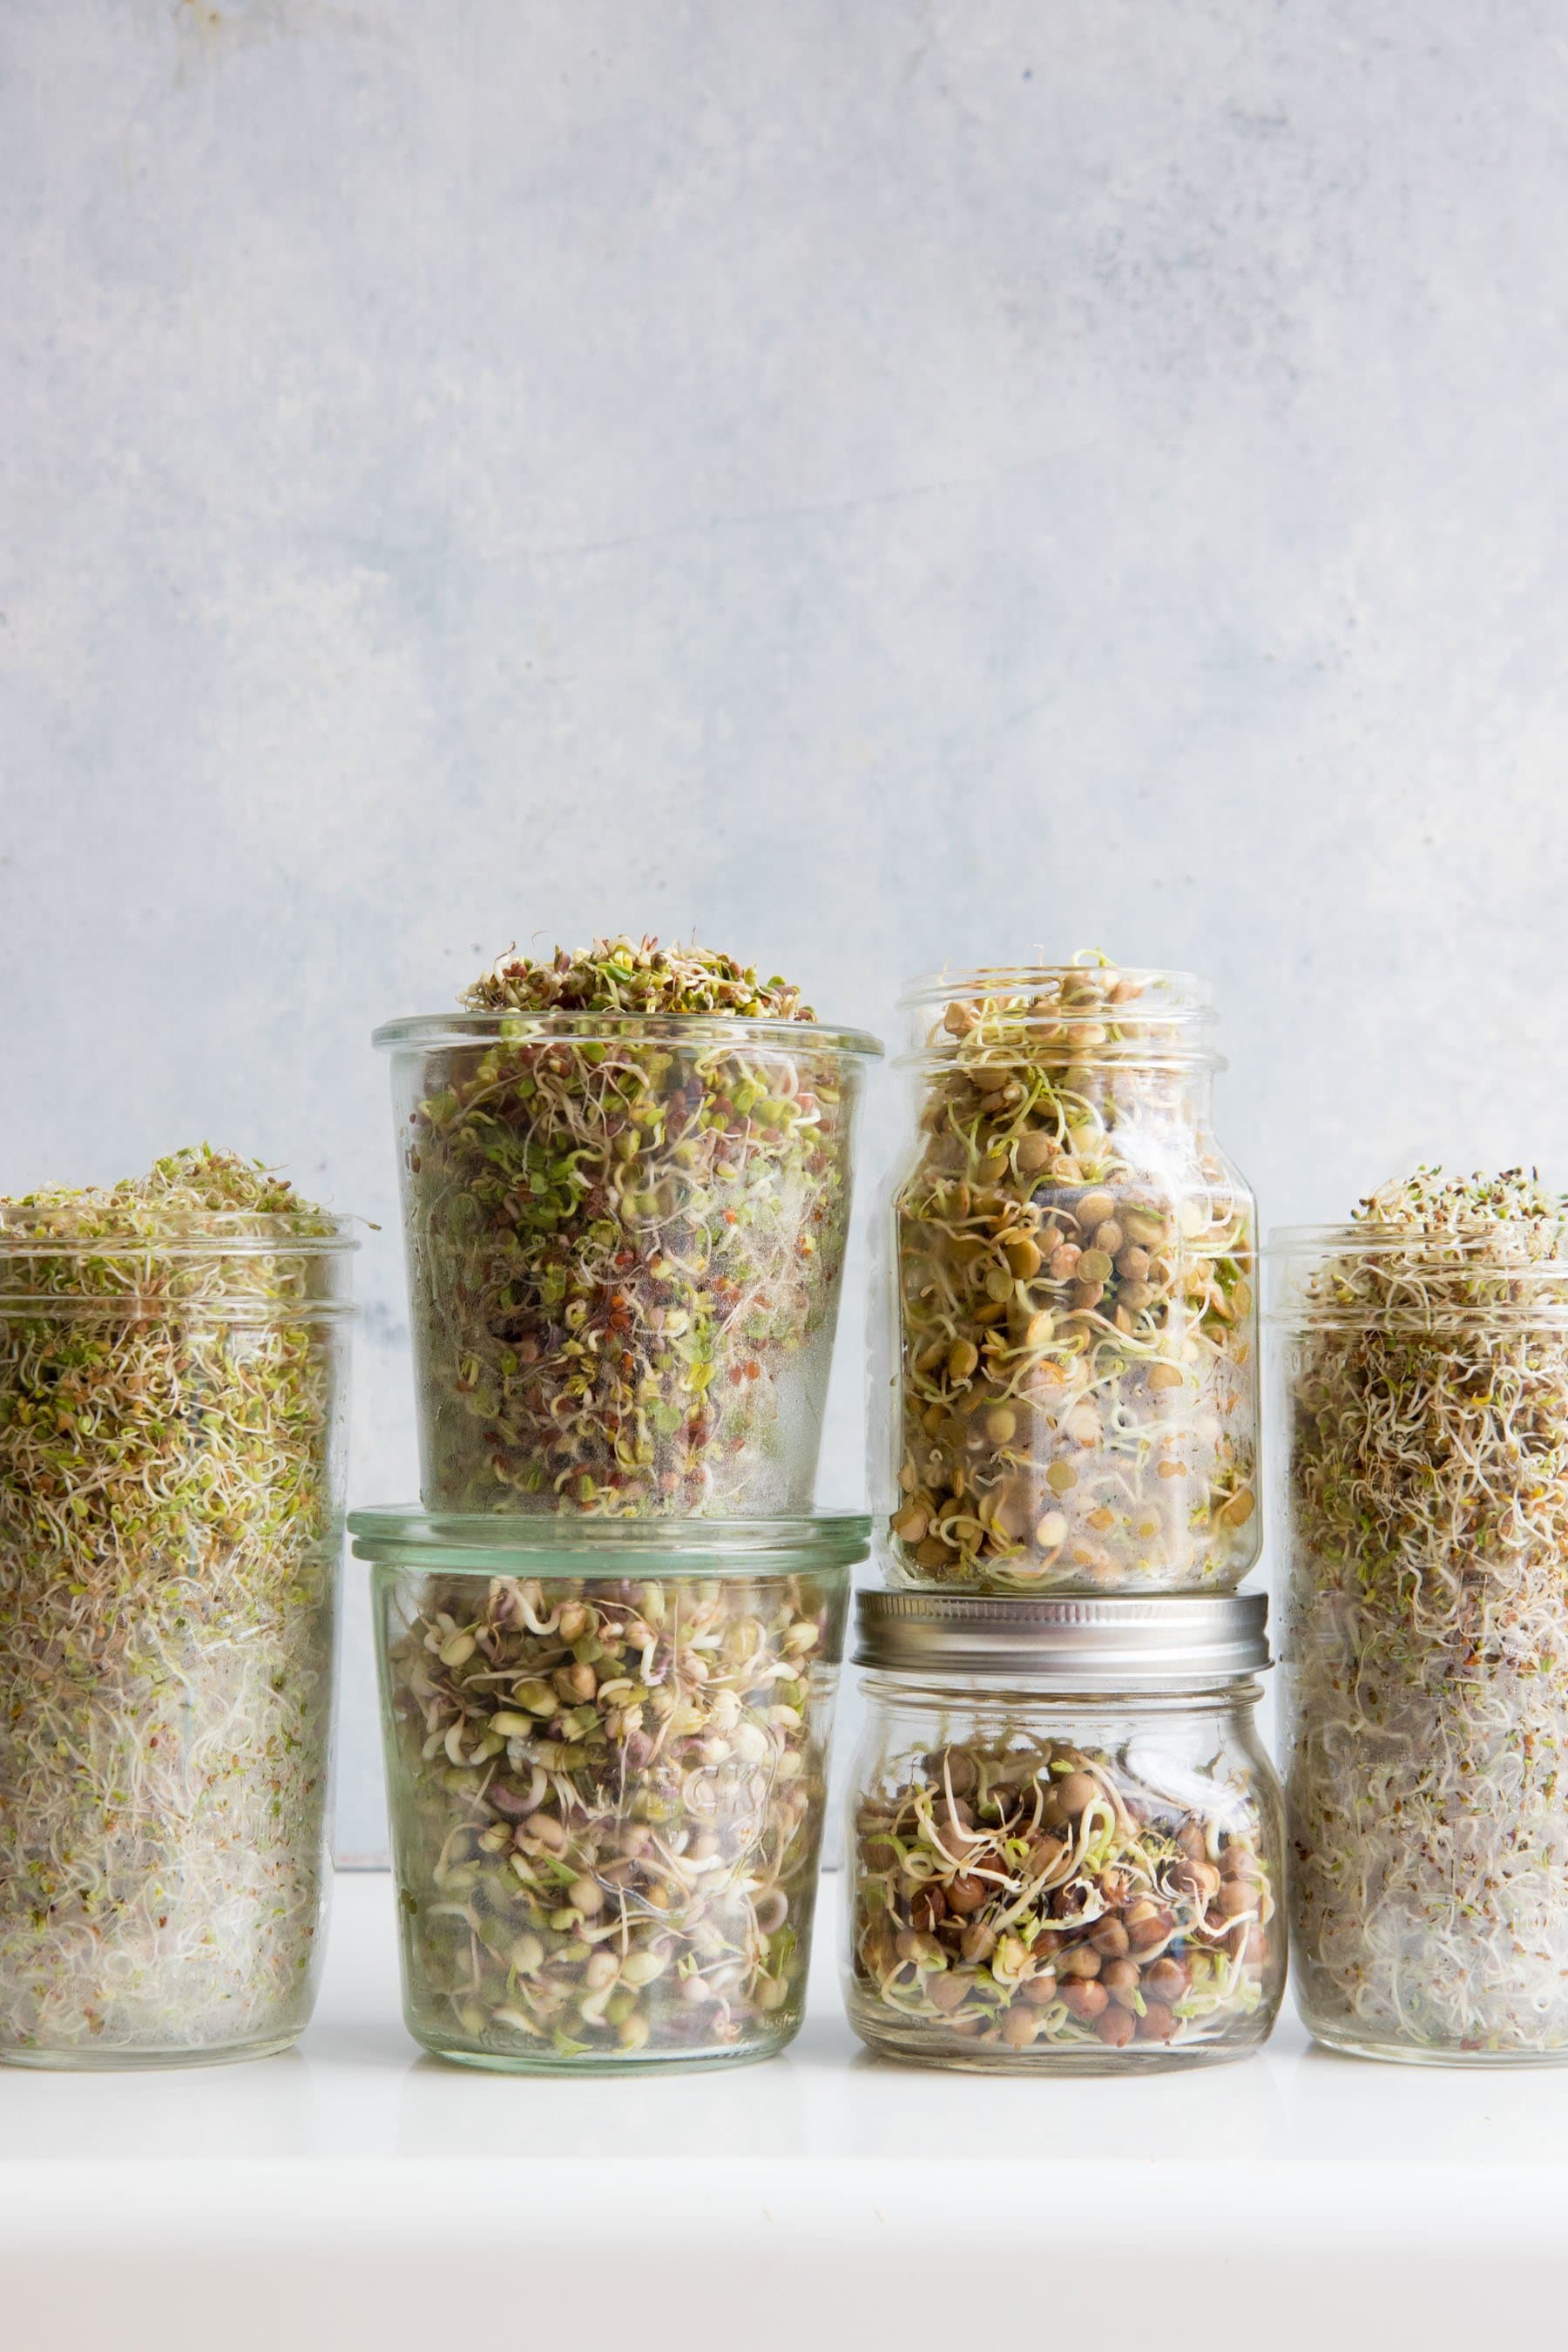 Side shot of various types of sprouts in mason jars, including lentils, alfalfa, clover, mung bean, wheat, radish, pea, and mustard